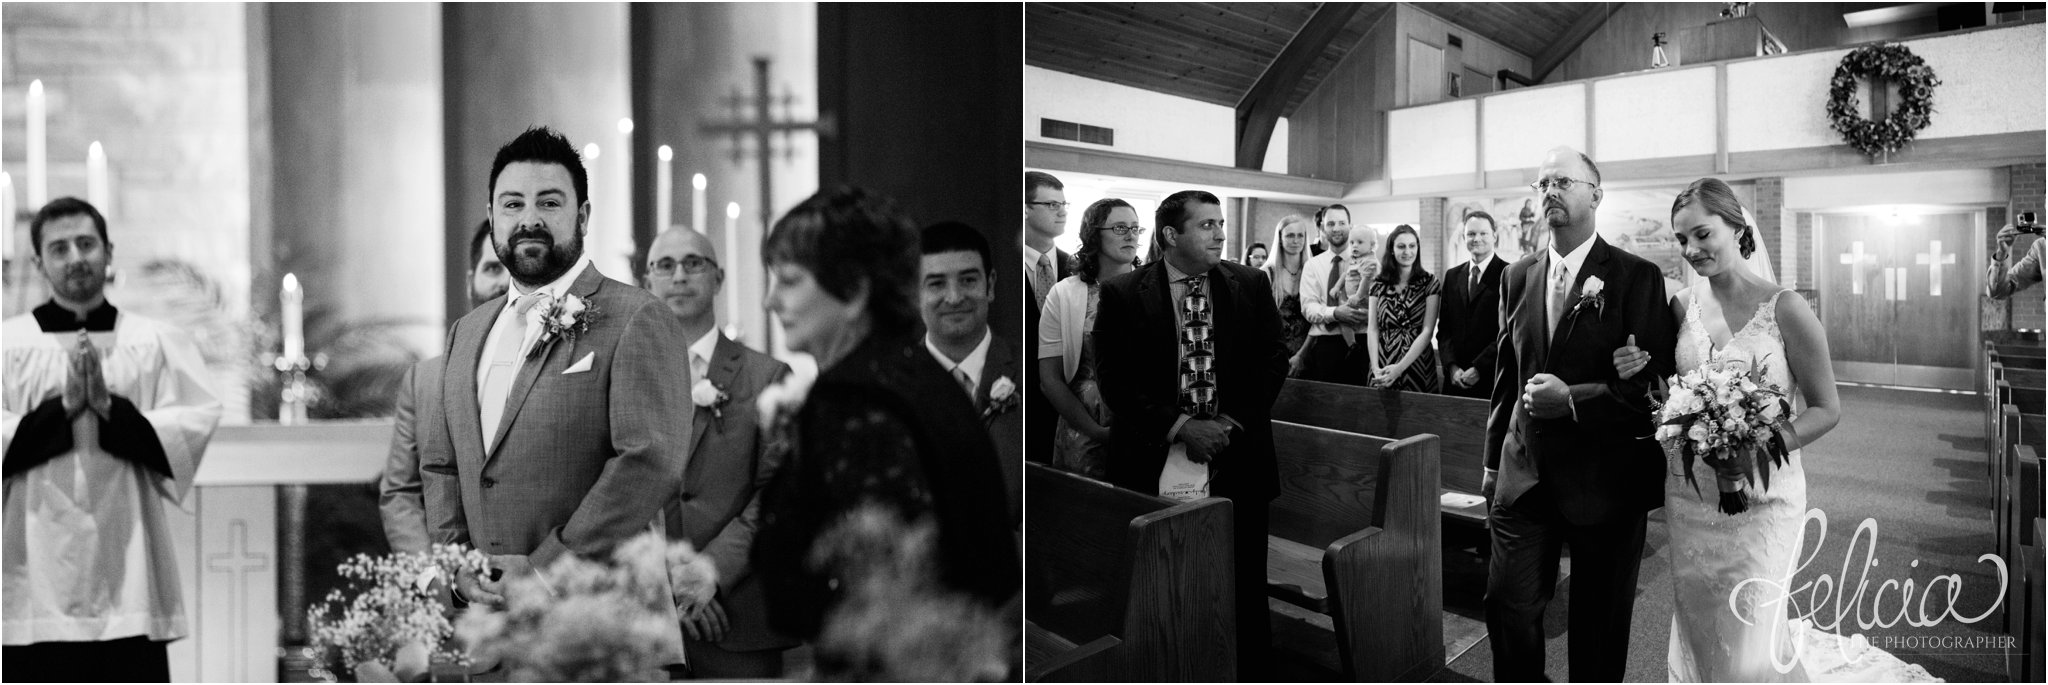 Black and White | Wedding | Wedding Photography | Wedding Photos | Travel Photographer | Images by feliciathephotographer.com | Wedding Ceremony | Sacred Heart Catholic Church | Father of the Bride | Walking Down the Aisle | Here Comes the Bride | Groom Reaction